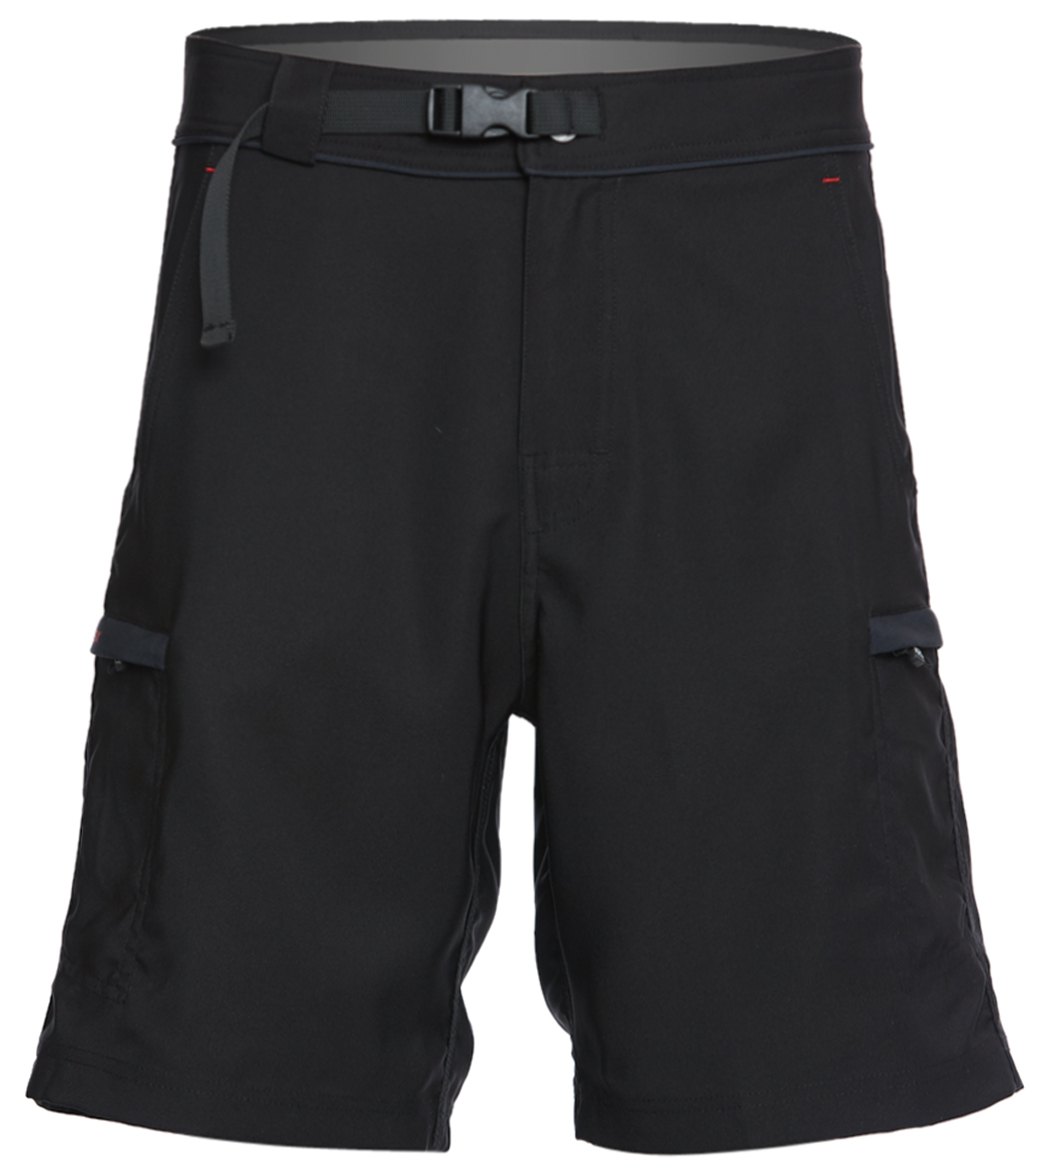 Level Six Men's 20 Canyon Guide Expedition Weight Short - Black 30 Polyester - Swimoutlet.com